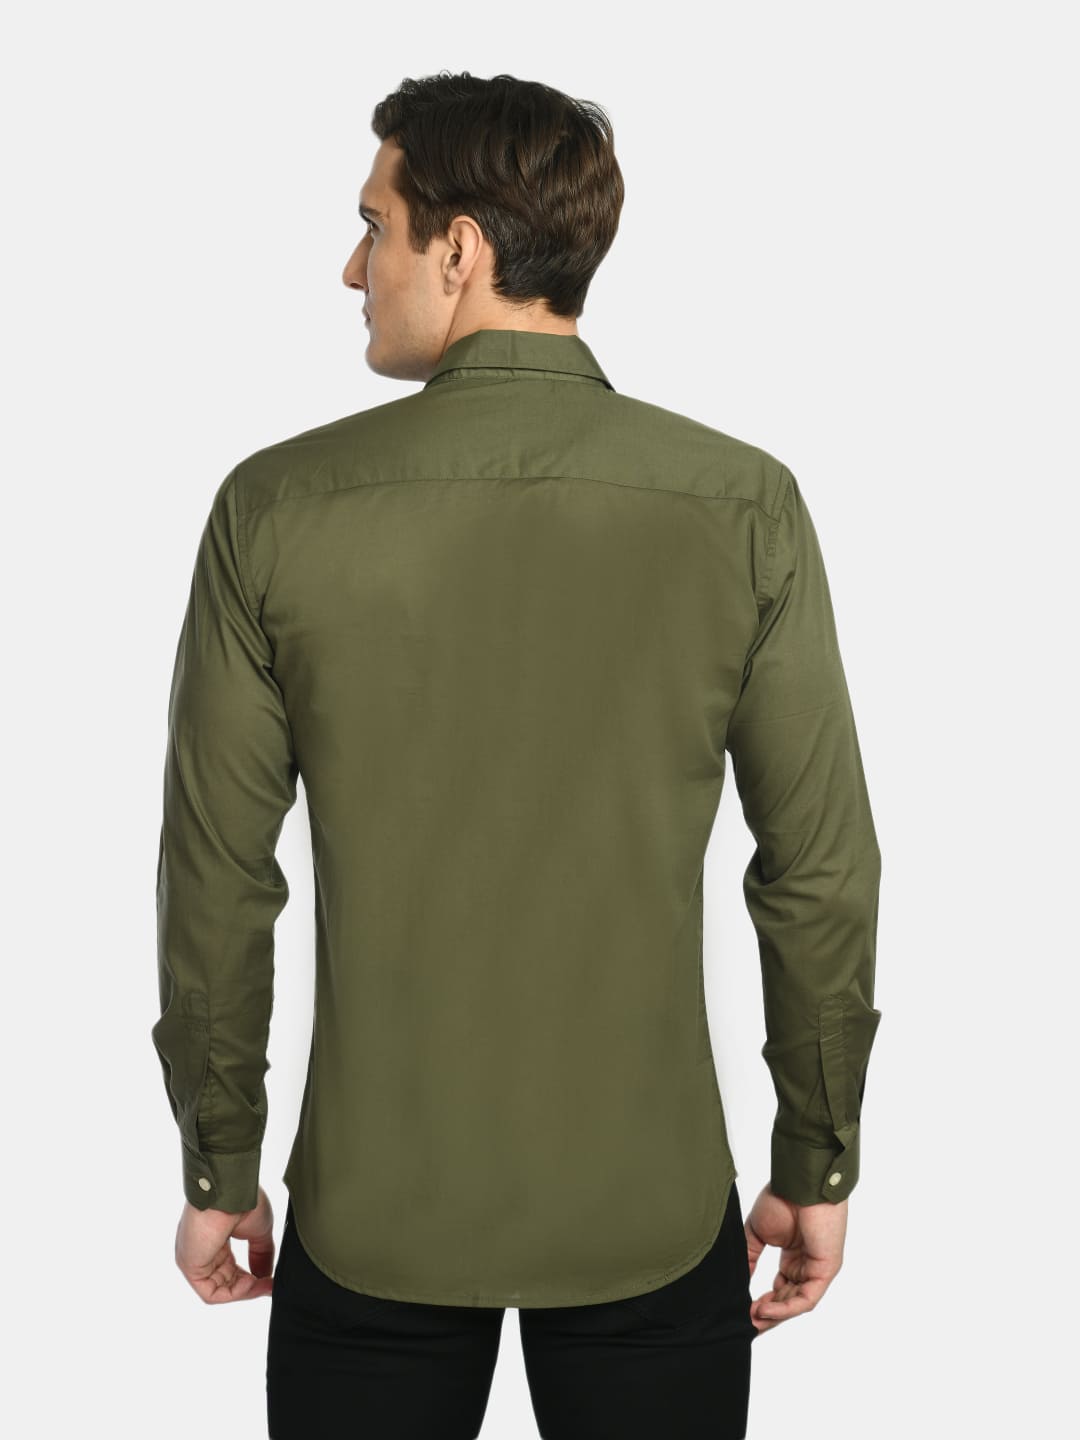 Men's Olive Green Solid Cotton Casual Shirt